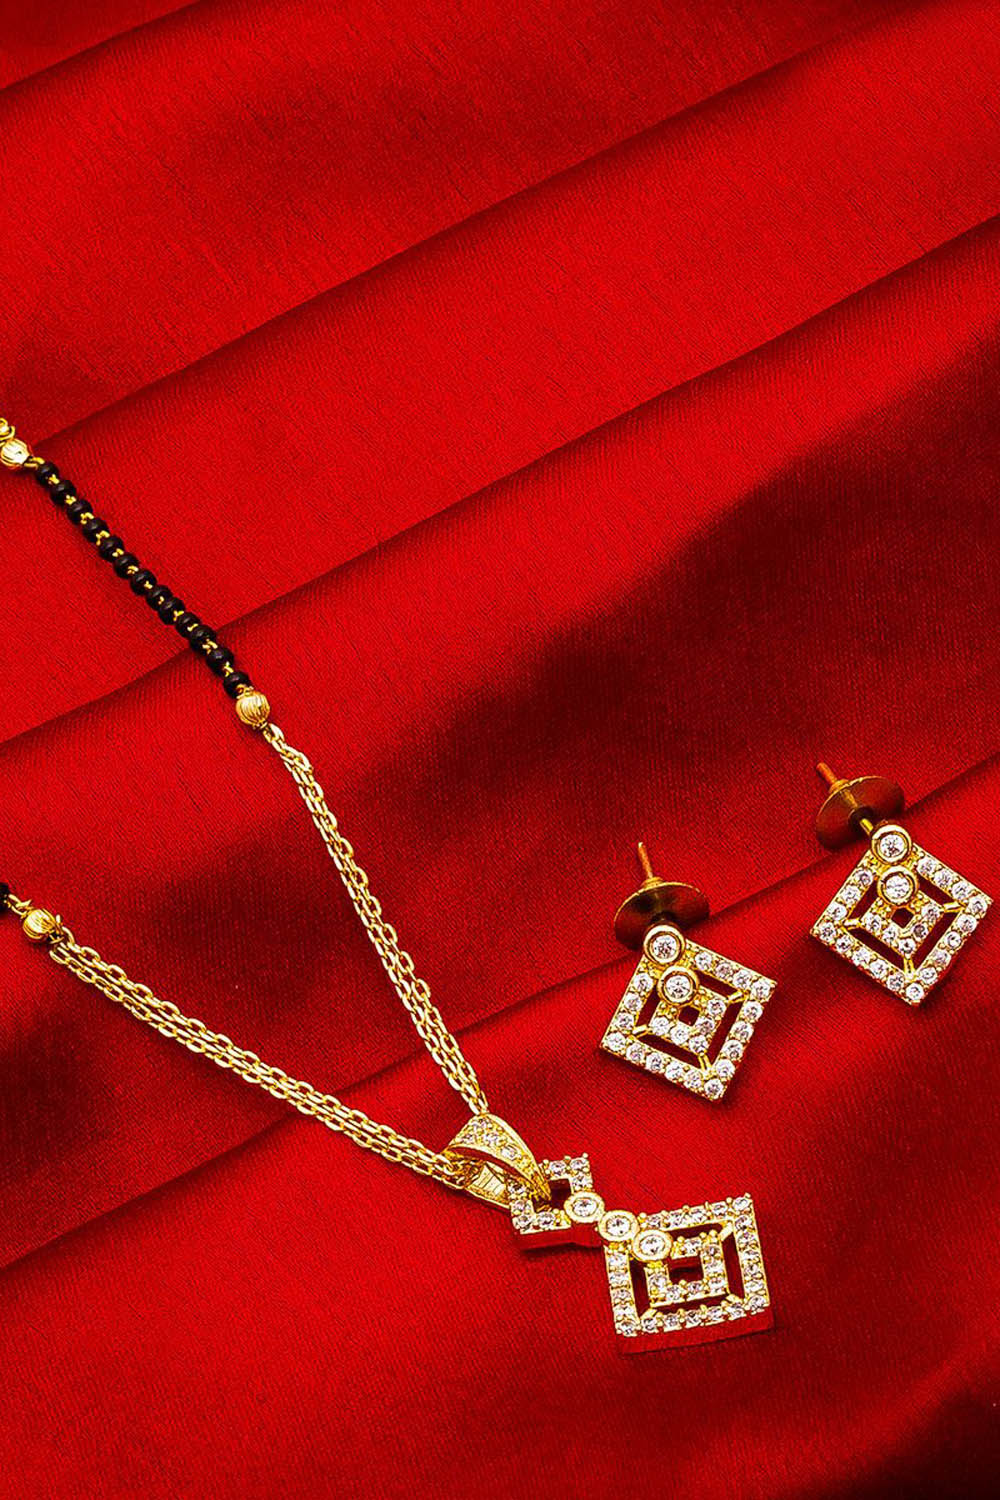 Women's Alloy Mangalsutra Set in Silver and Gold